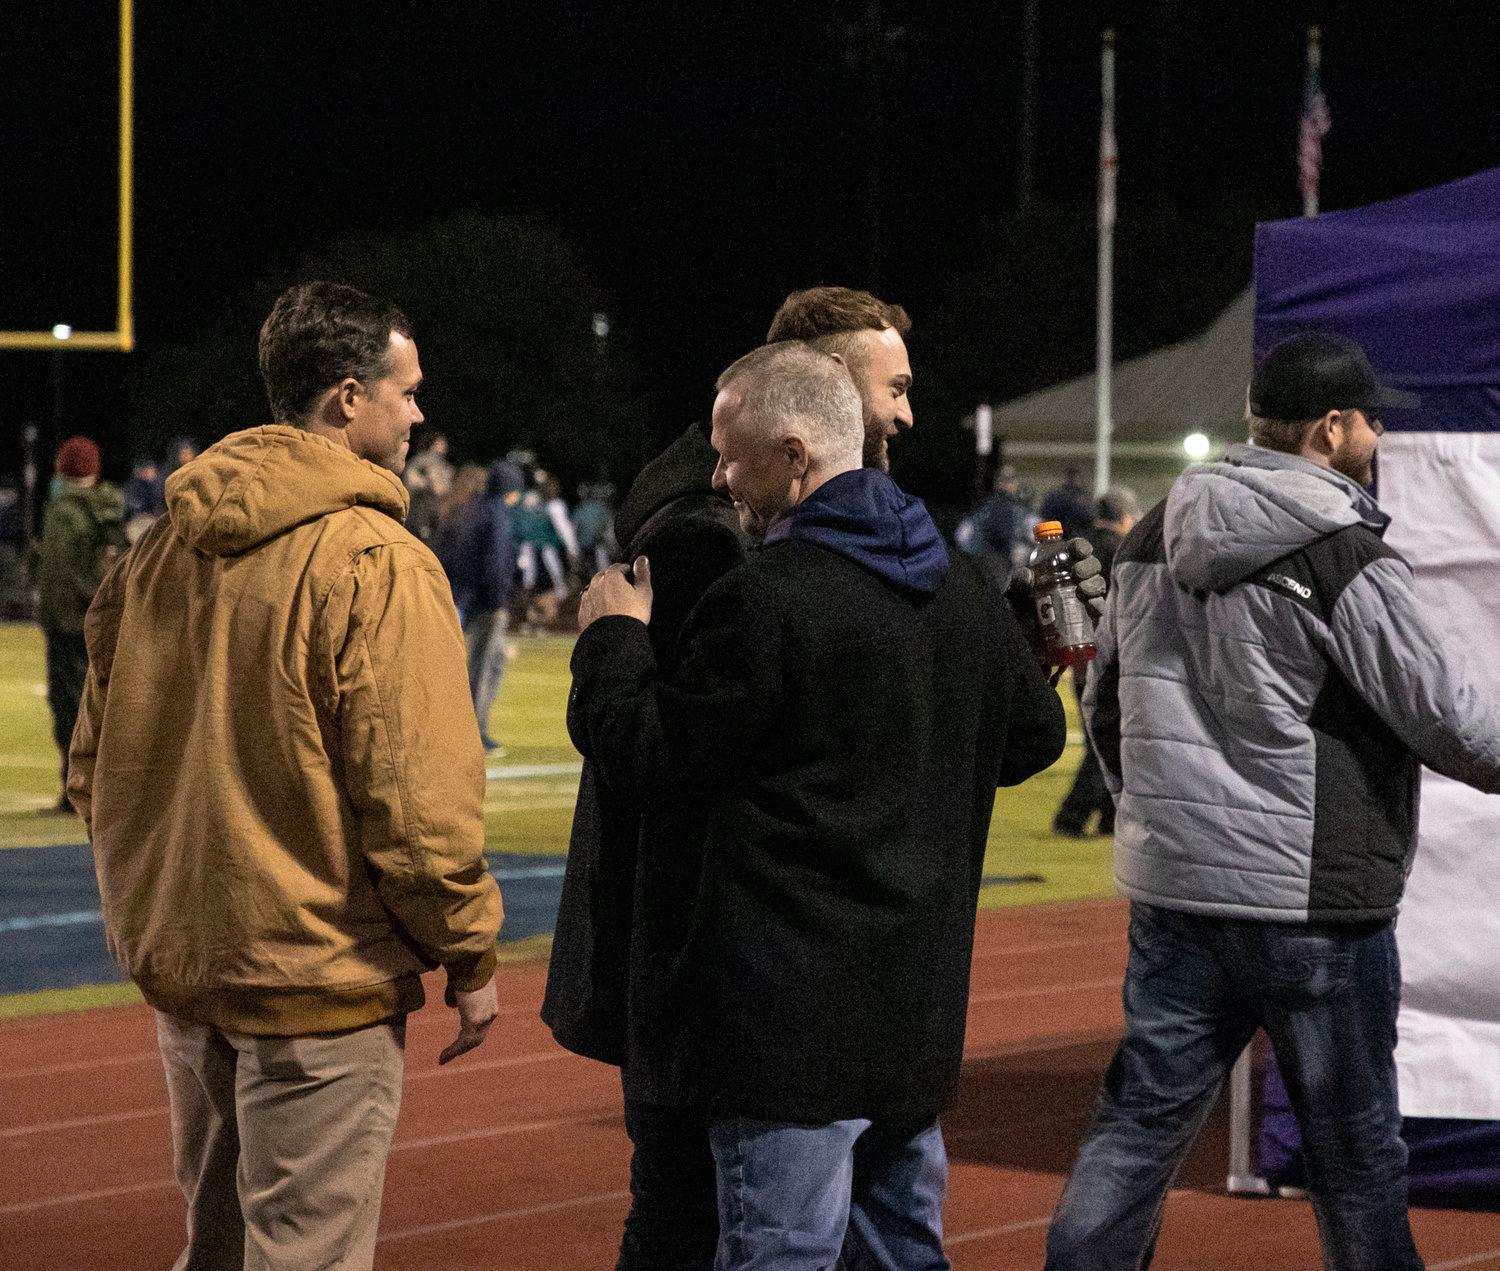 Gulf Shores athletic director Kevin Tubbs greets Dolphin football alumni JD Swiger and Joethan Phillips after the former players were honored with a pregame ceremony ahead of Gulf Shores’ third-round playoff game against Faith Academy at home Friday, Nov. 18.